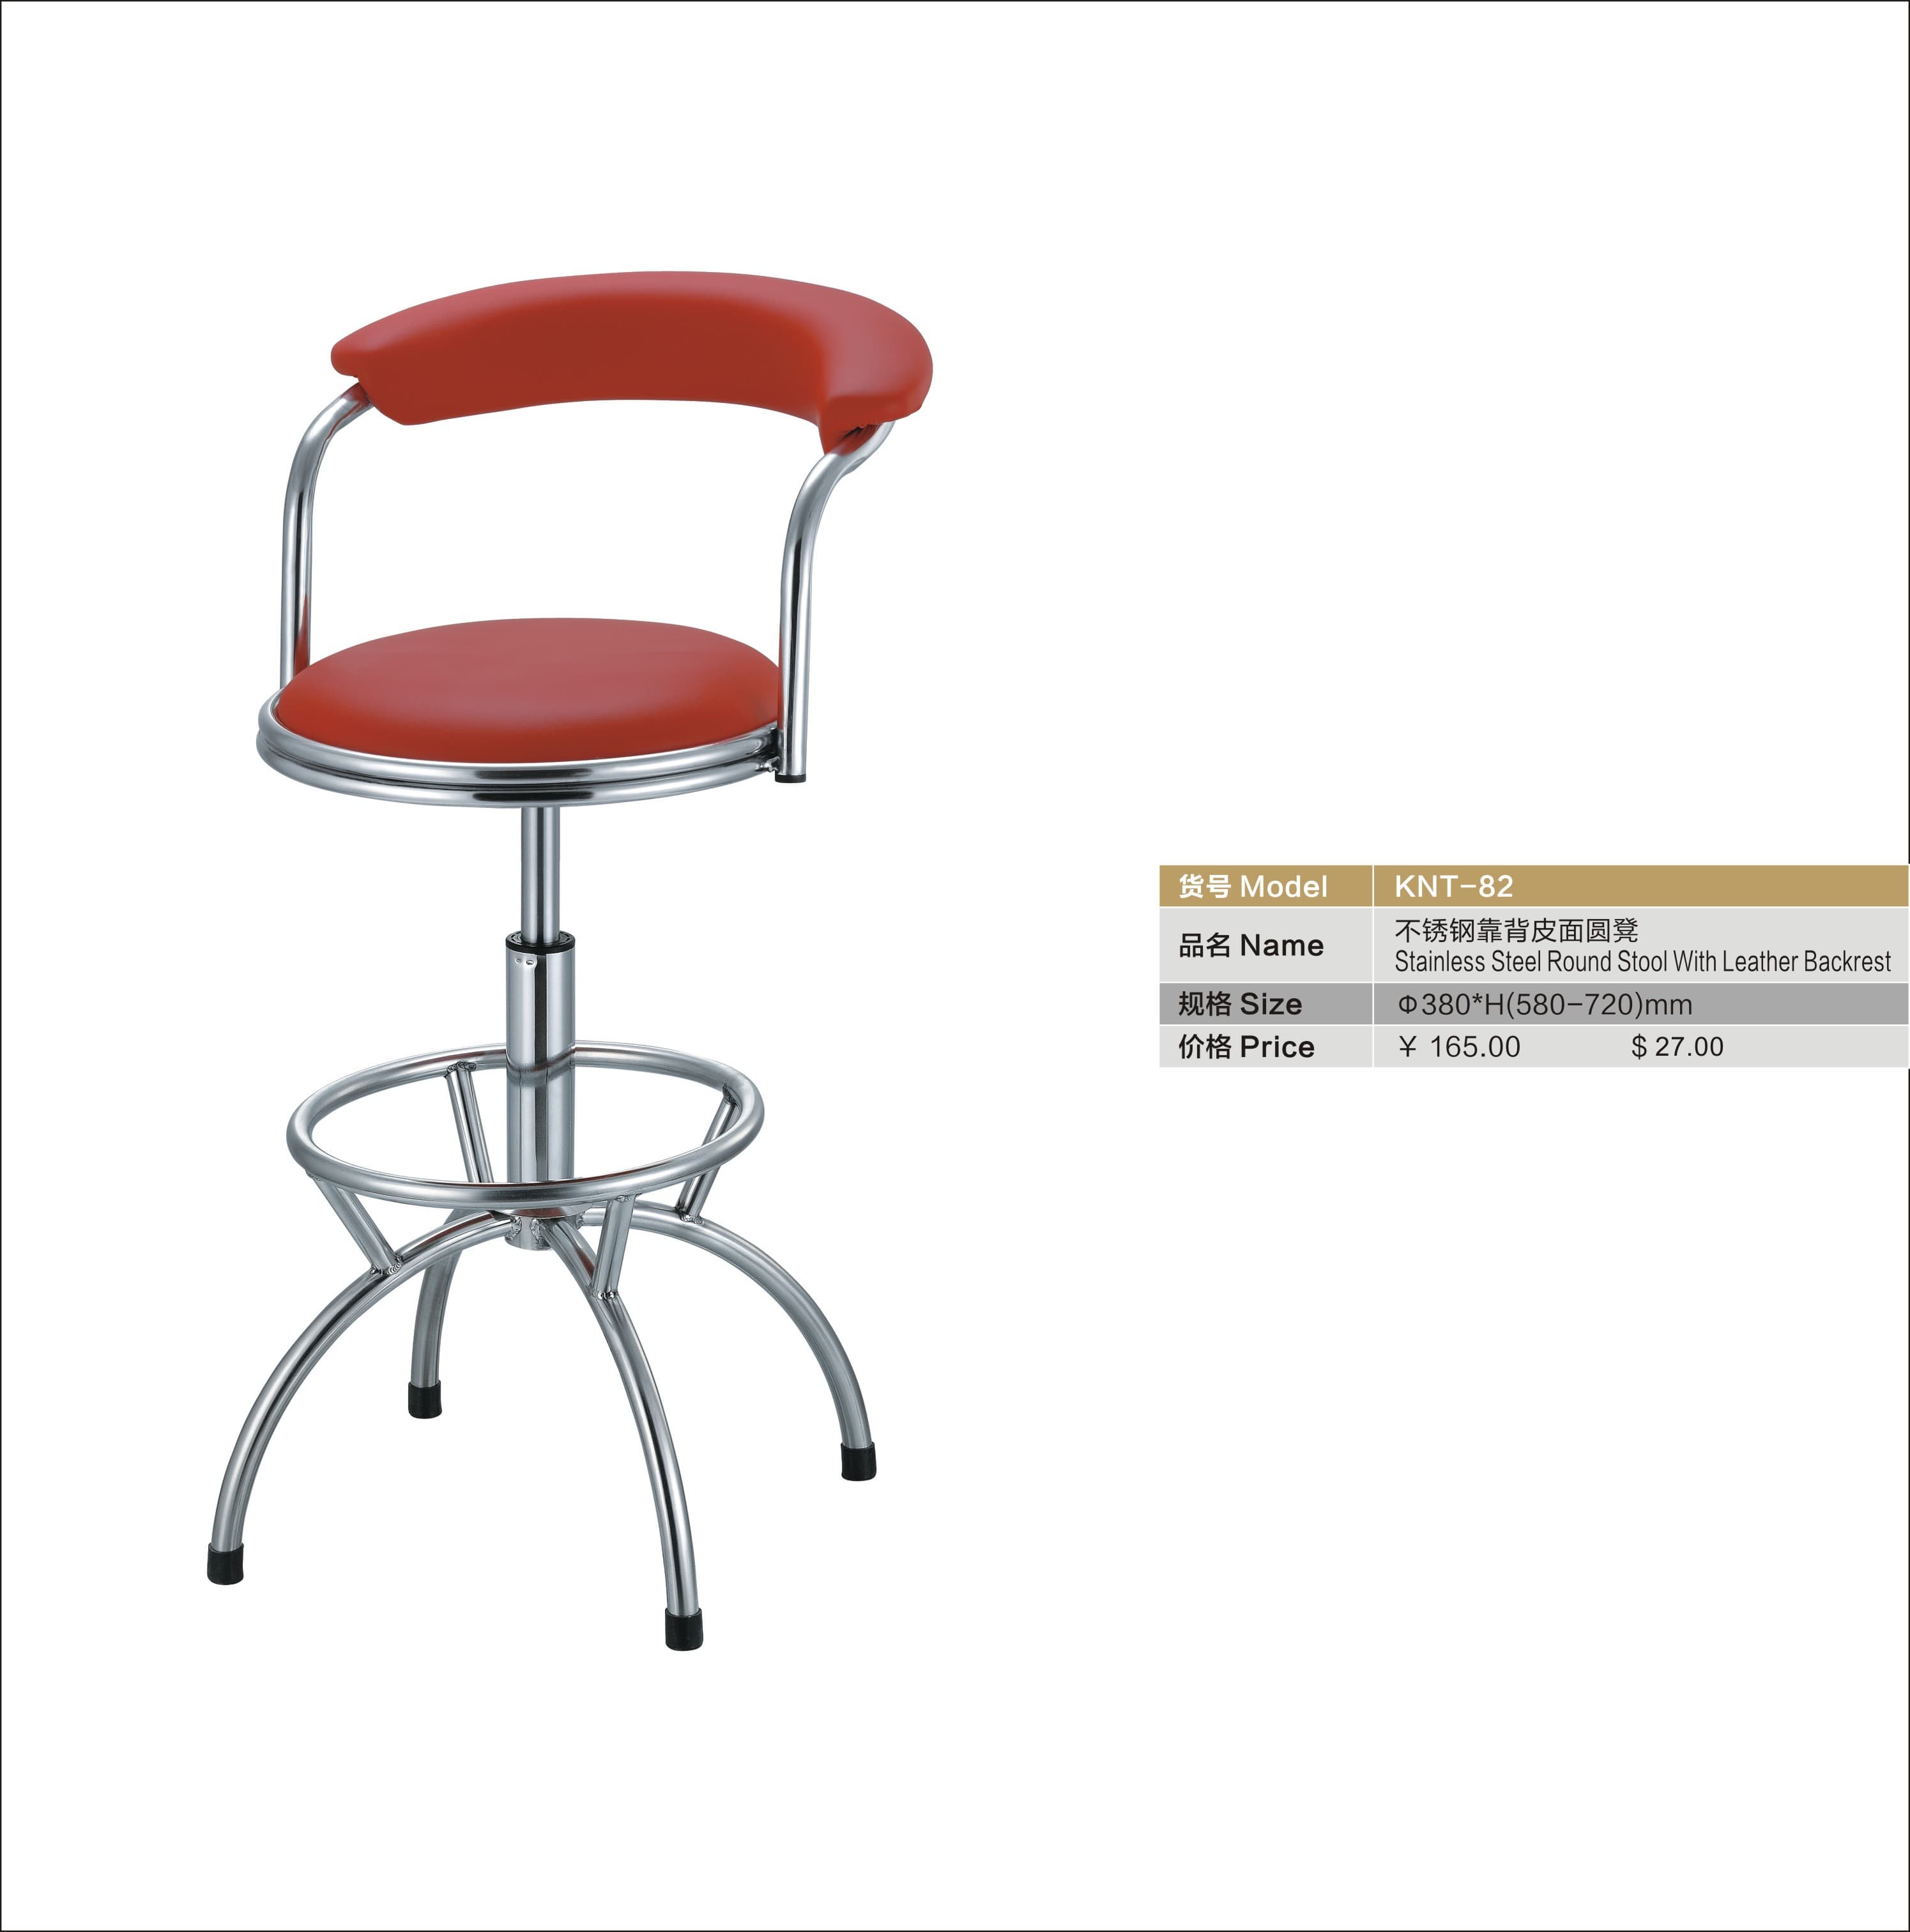 metal round stool with leather backrest